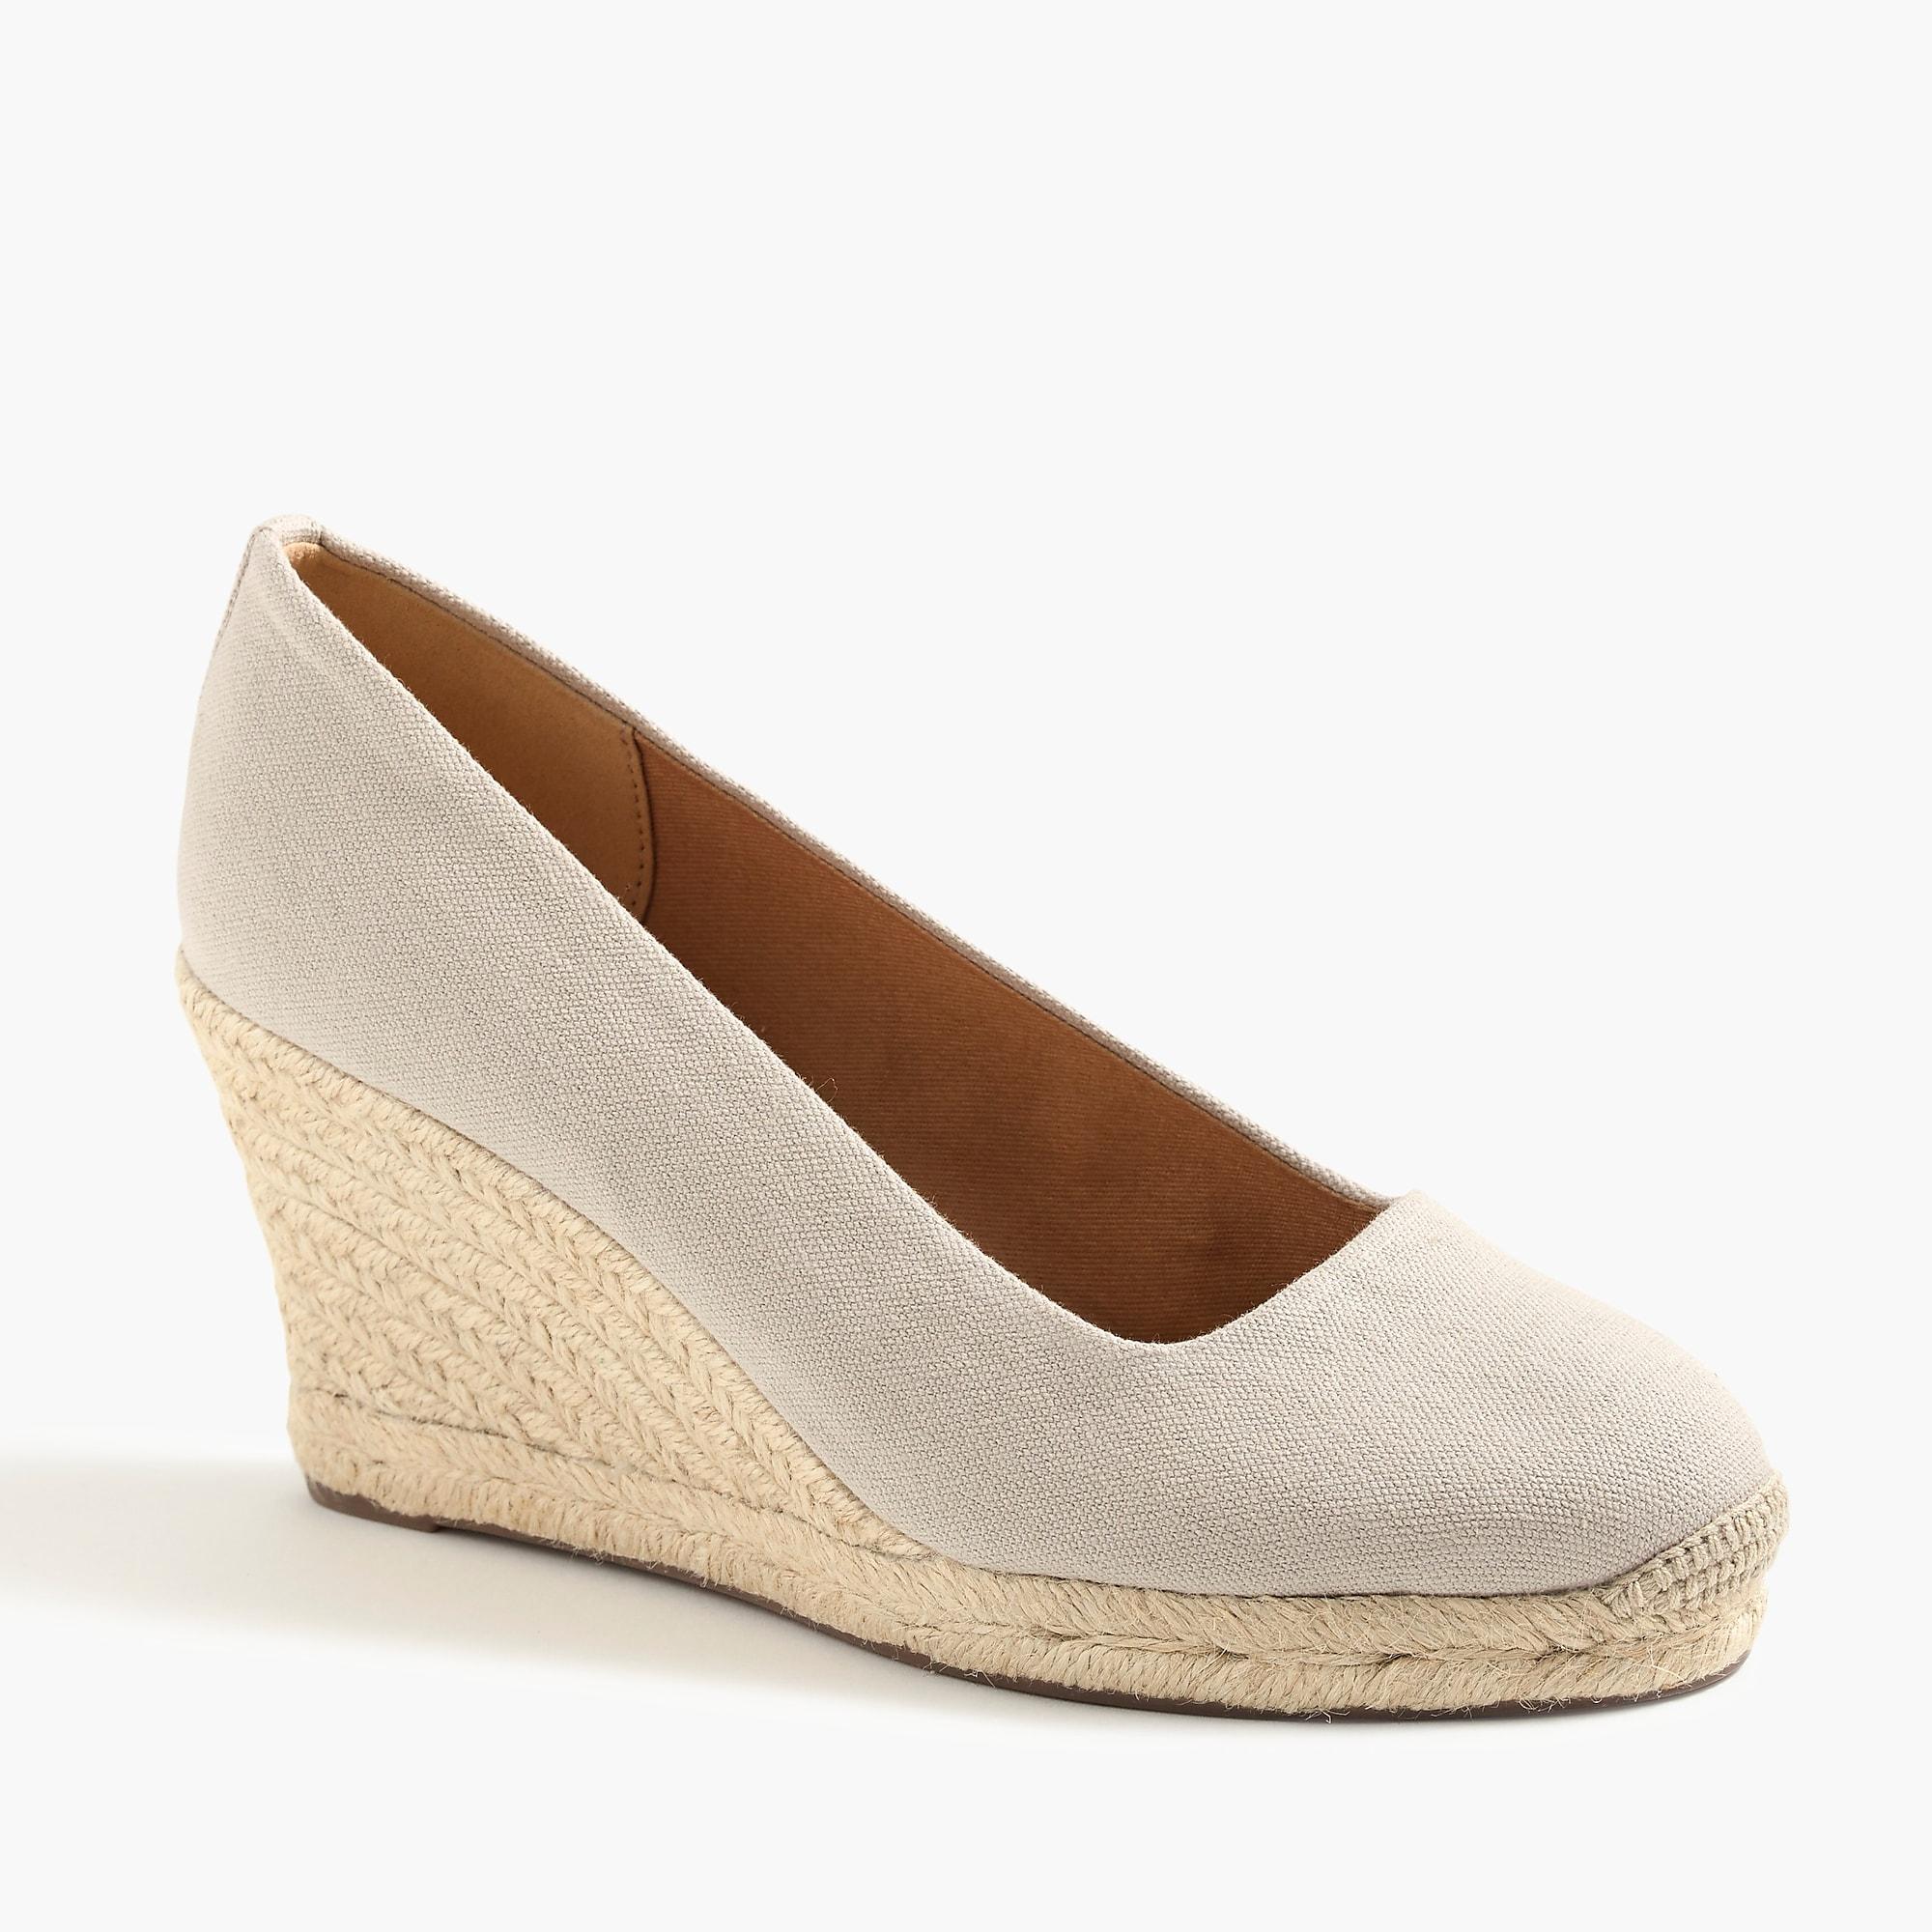 J.Crew New Canvas Espadrille Wedges in Natural - Lyst